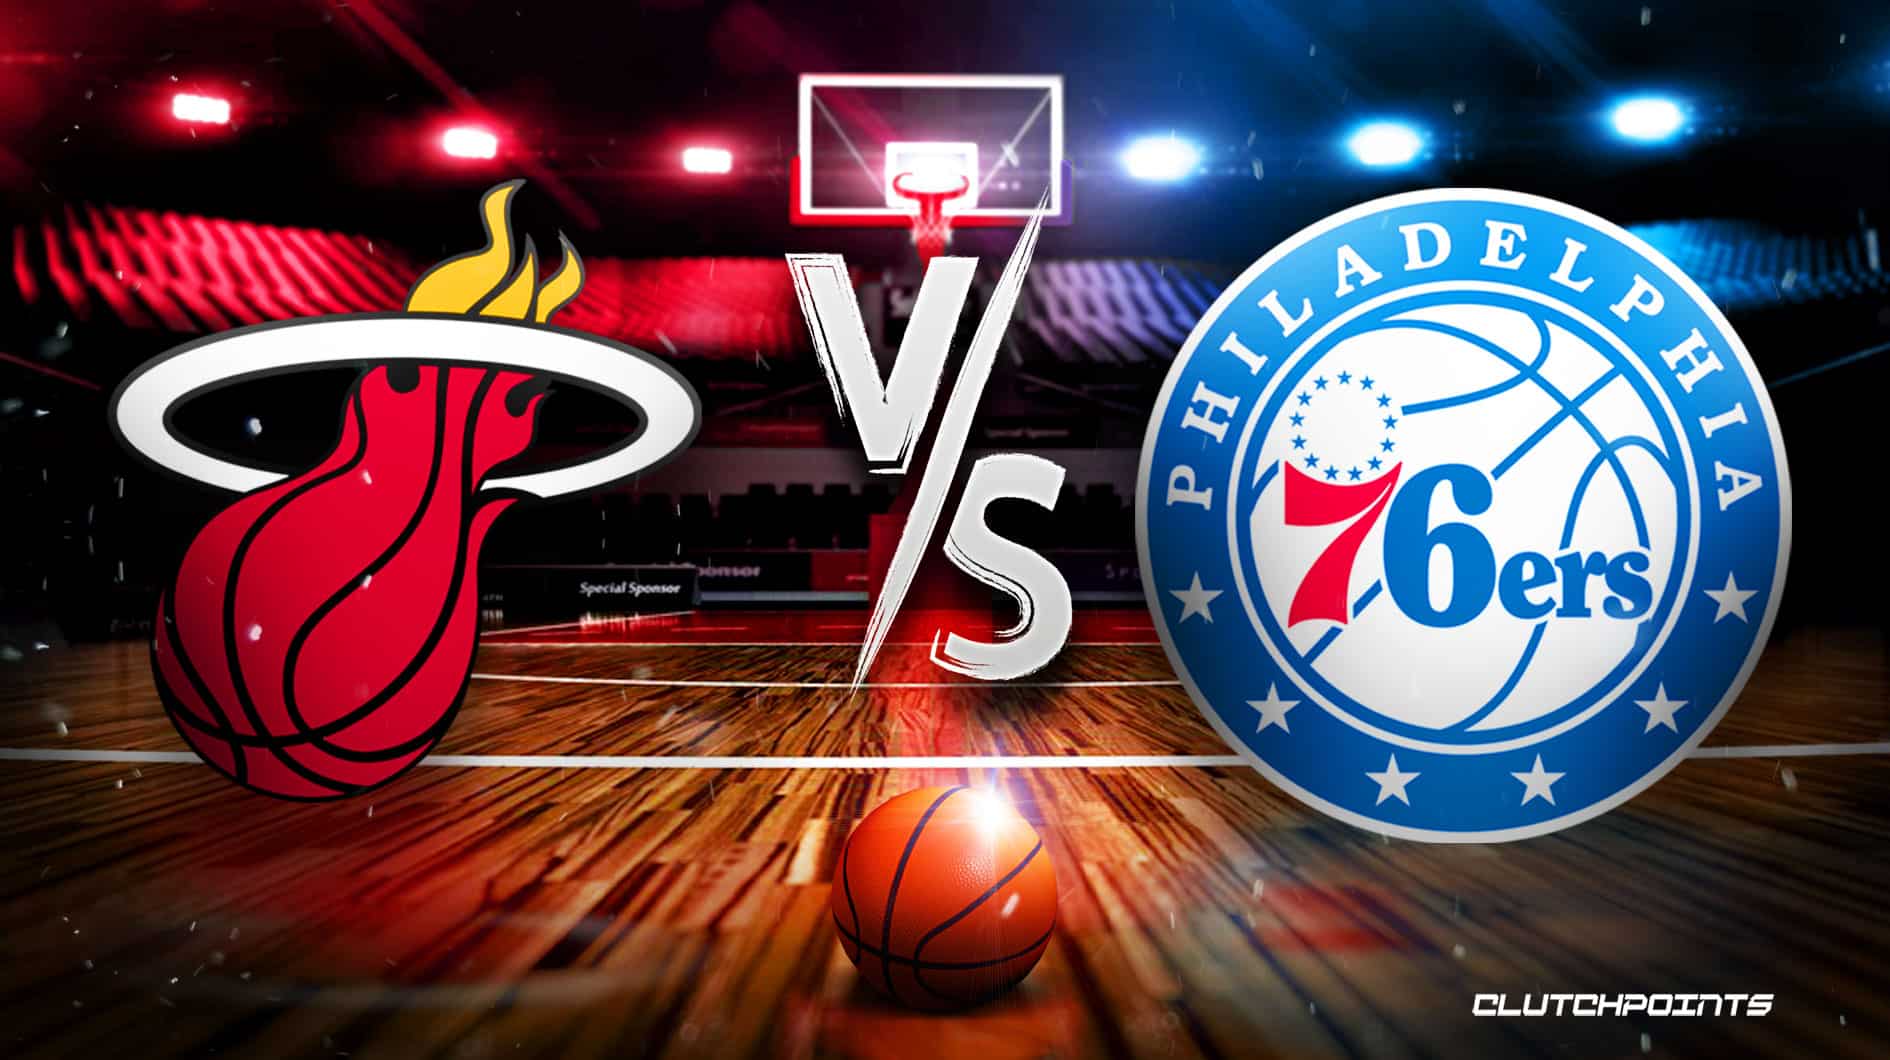 Red-hot LeBron James and Heat to take on 76ers